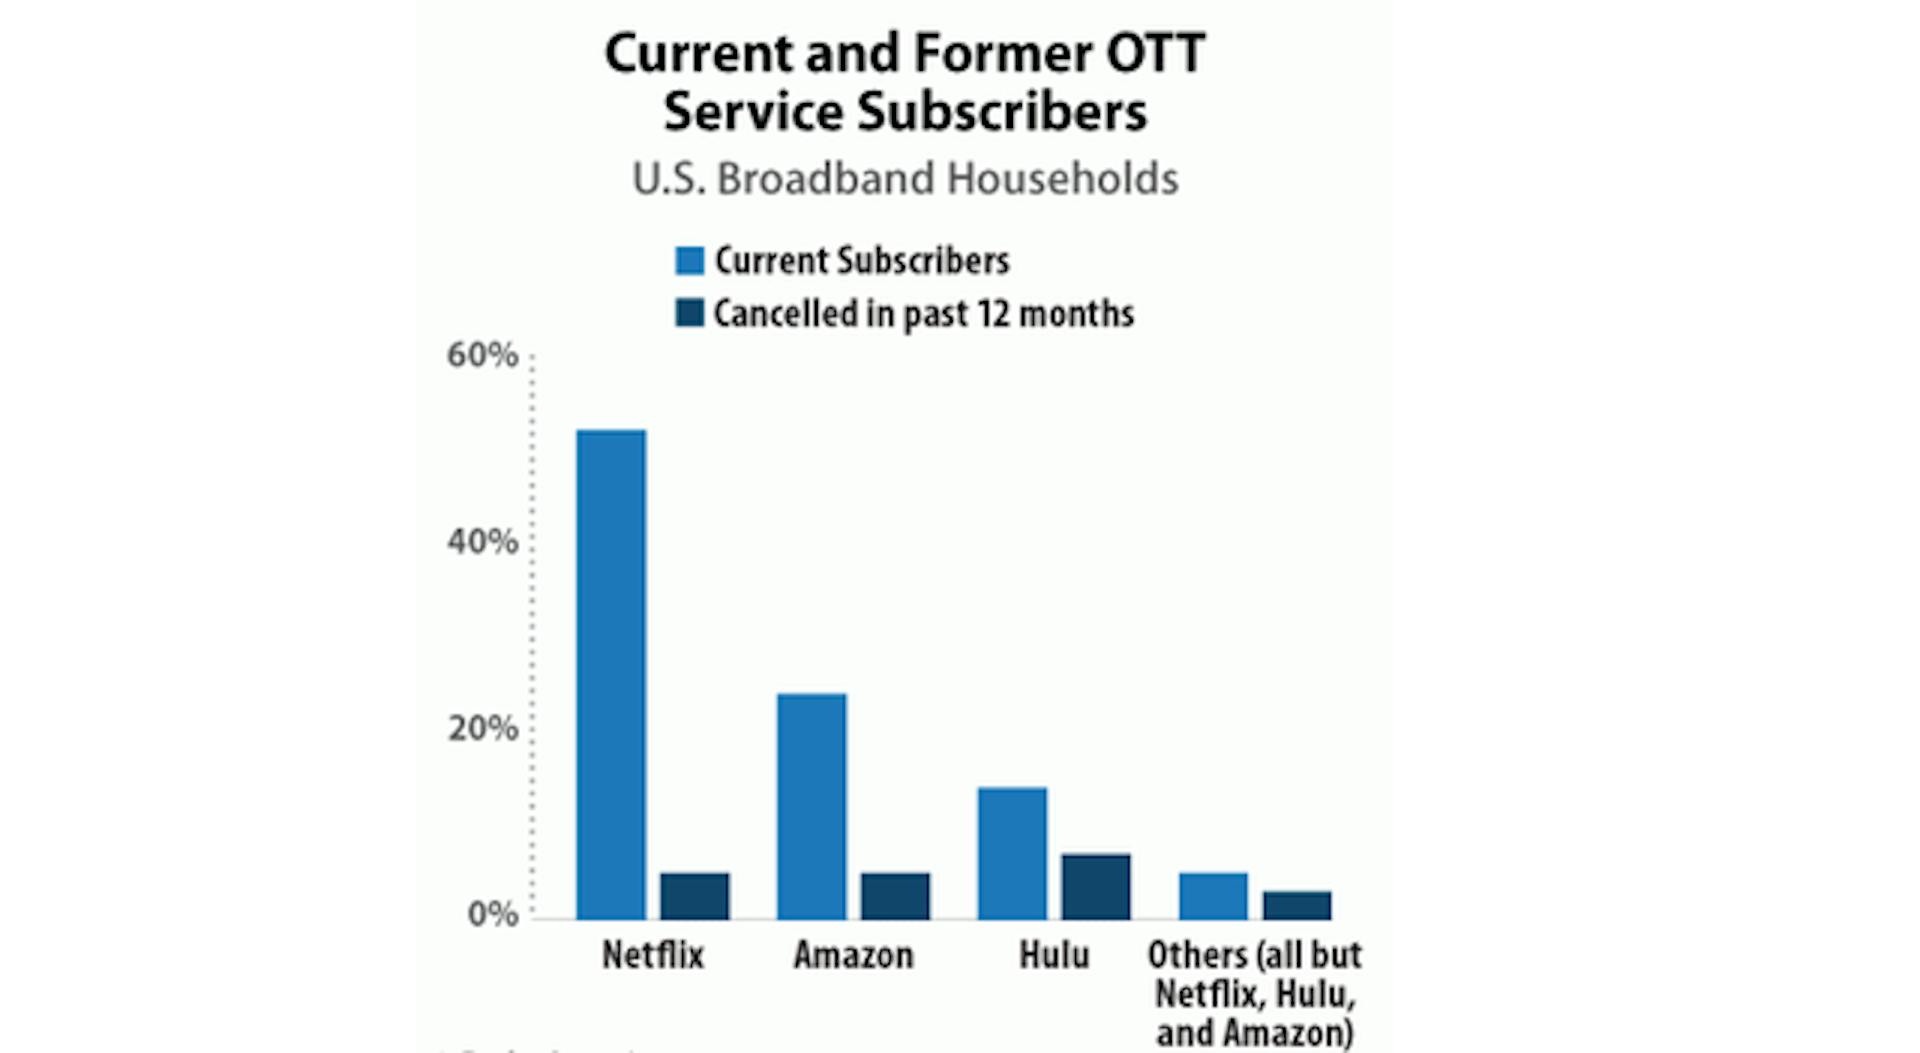 Graph: Current and Former OTT service subscribers, US. Netflix, Amazon, Hulu, Others. Netflix shows high current and low cancelled. Hulu has high relative cancellation volume